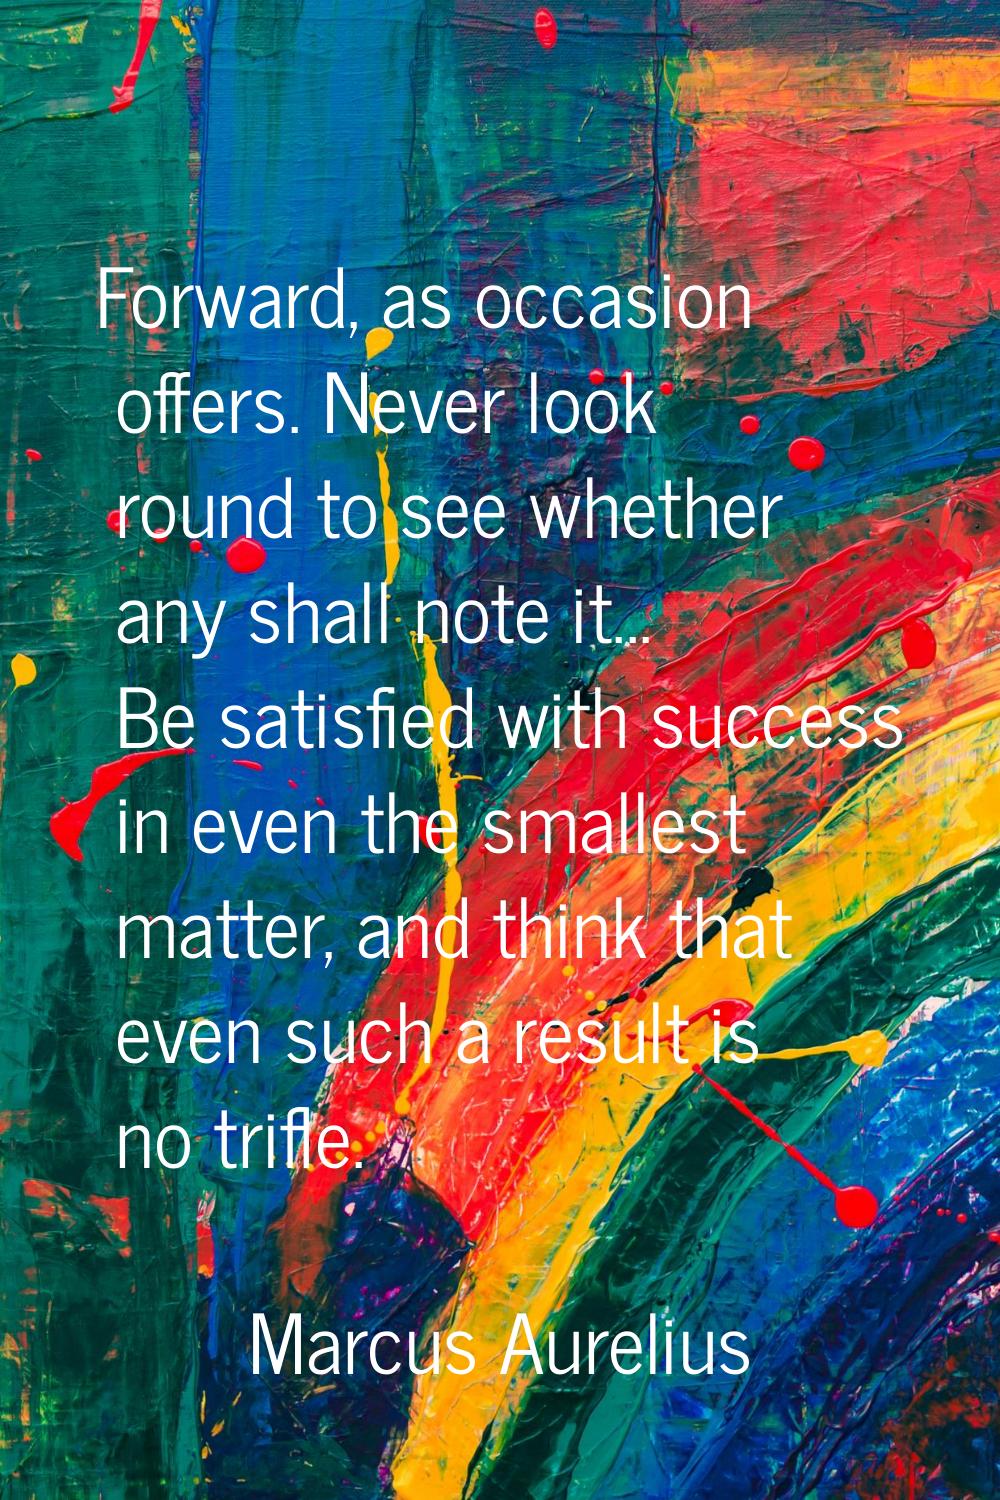 Forward, as occasion offers. Never look round to see whether any shall note it... Be satisfied with